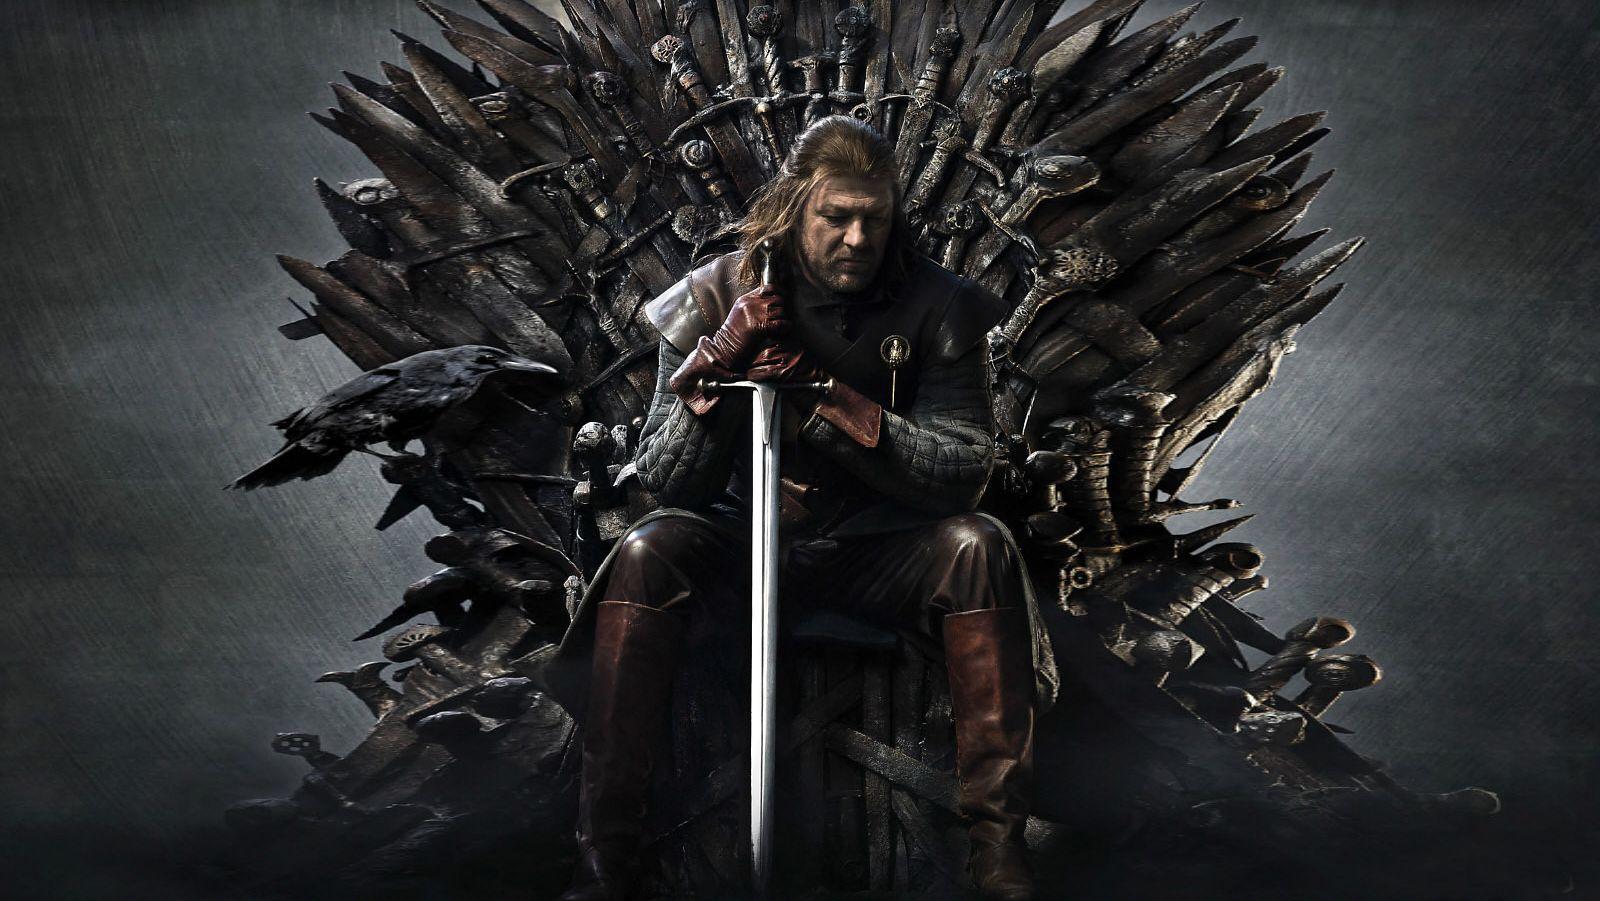 NFC Revisits Game of Thrones’ First Season